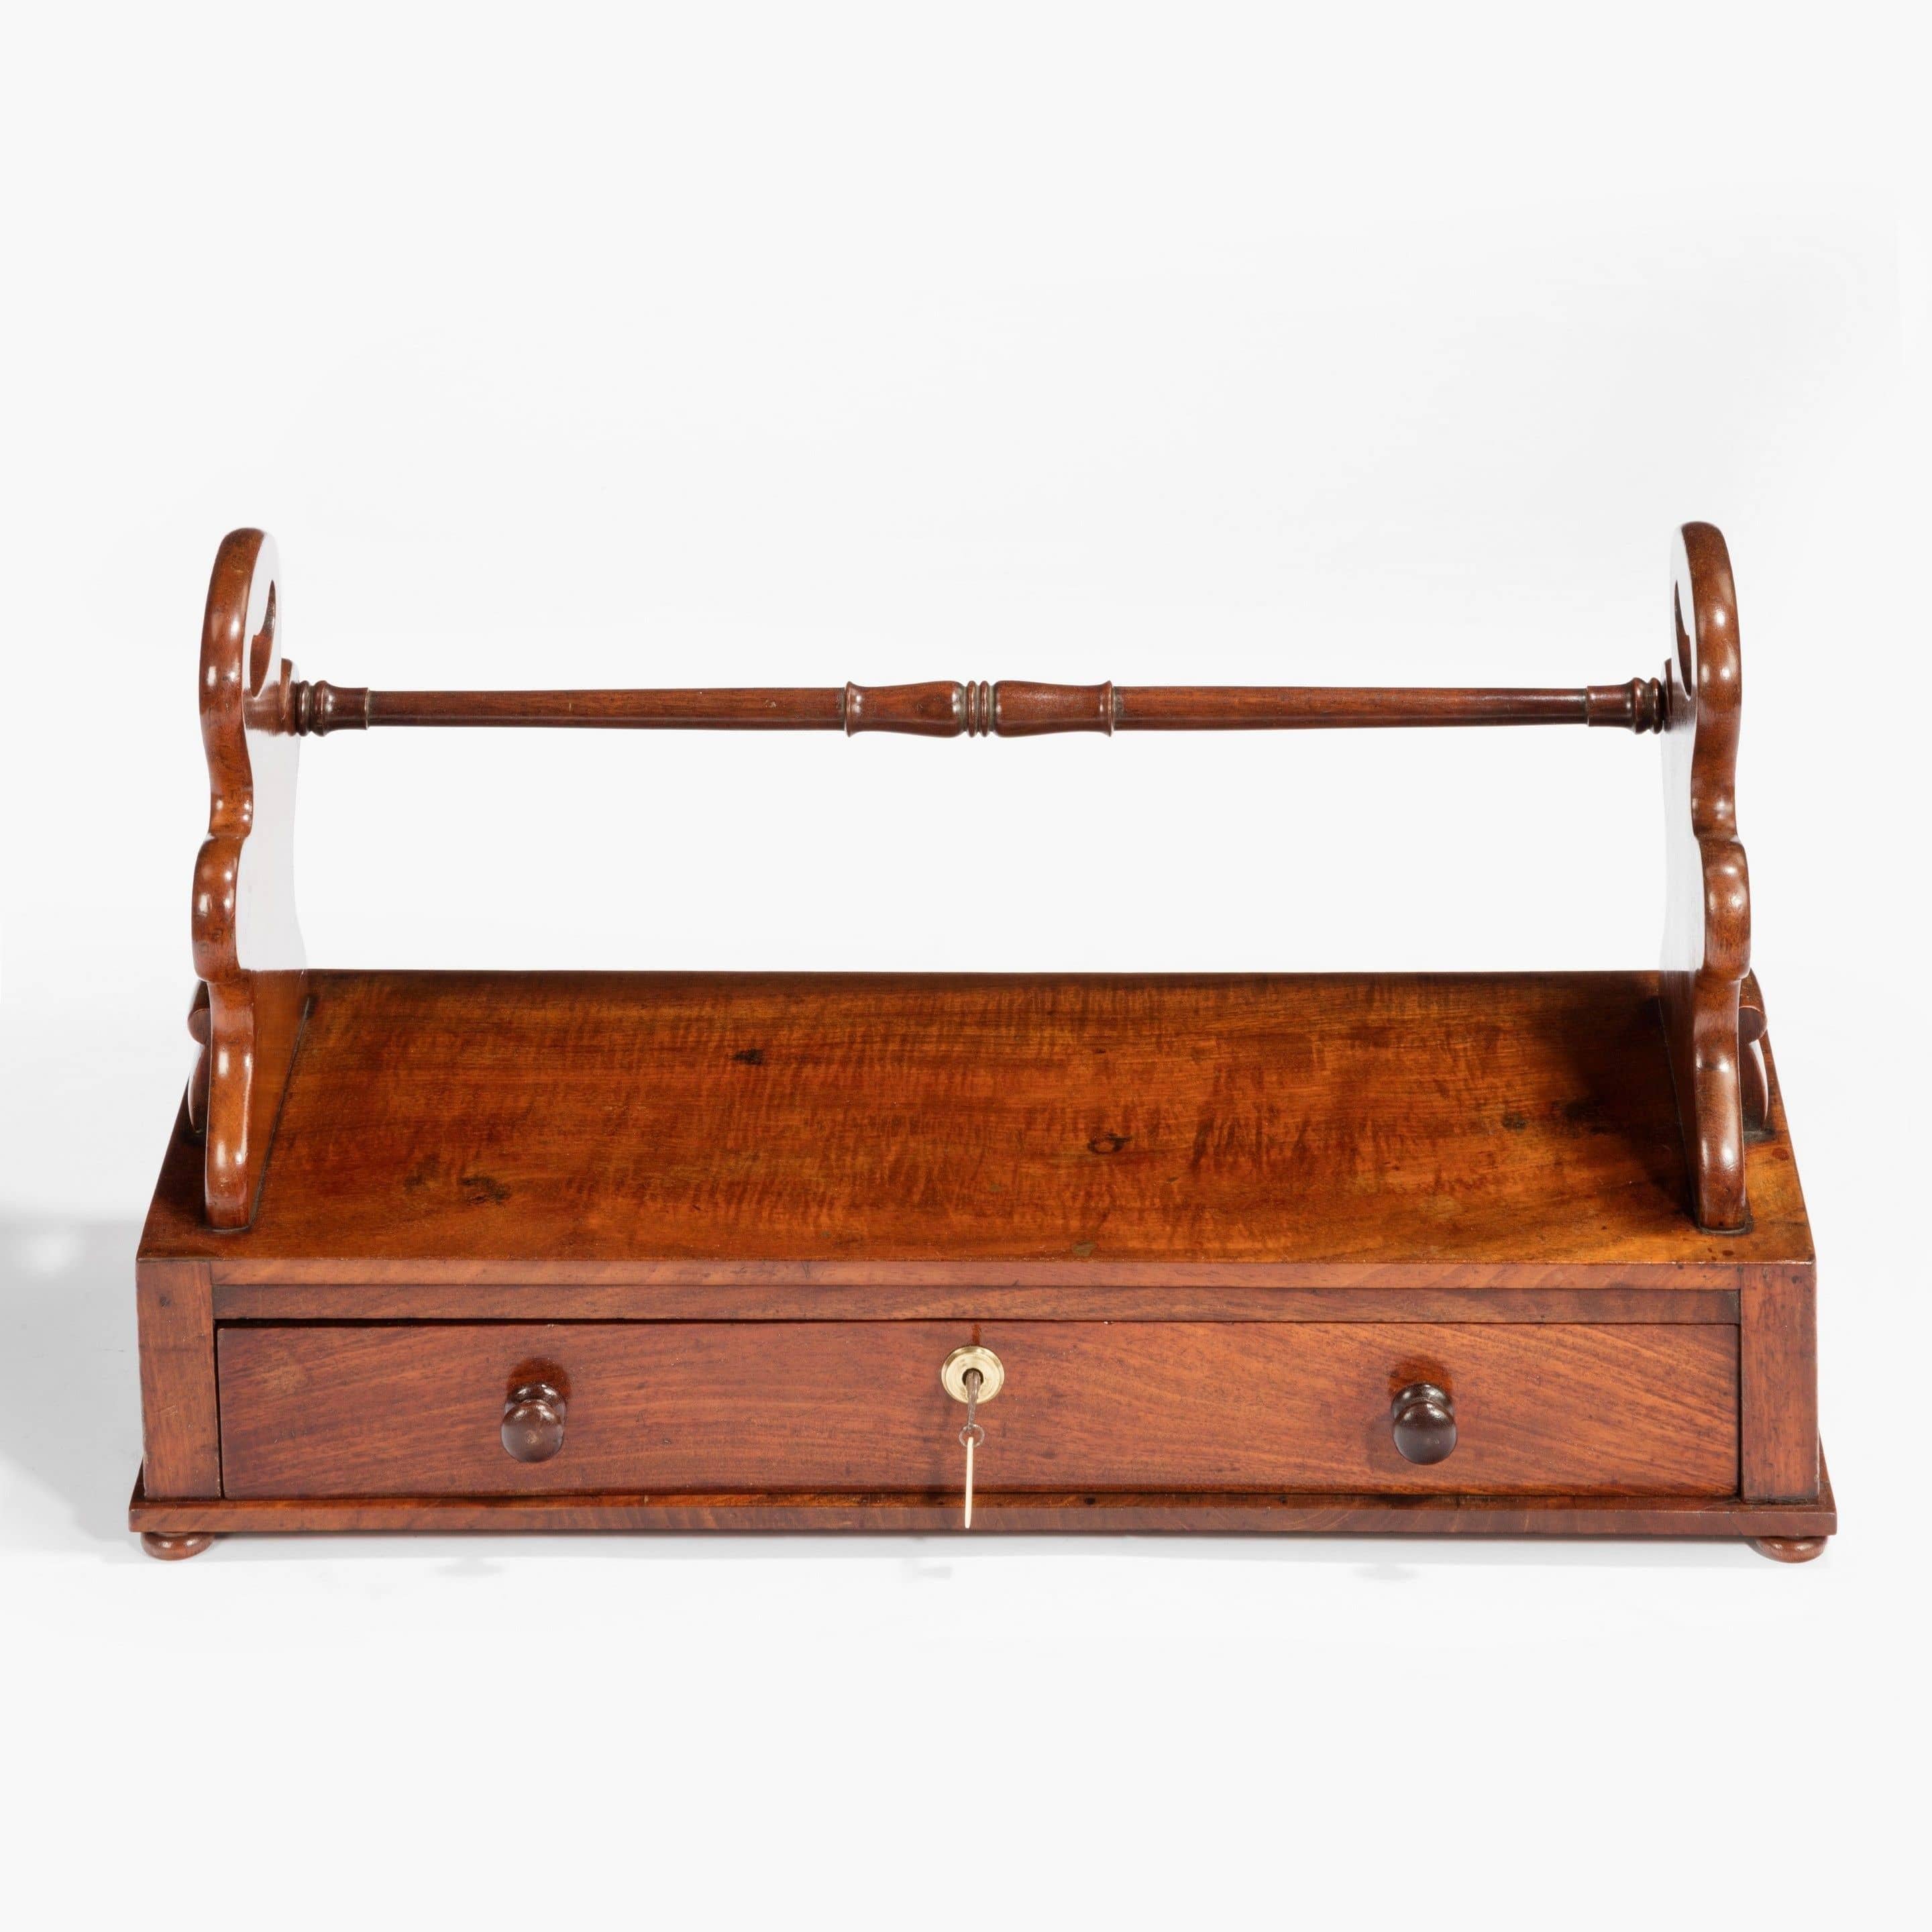 A William IV mahogany book carrier the shaped ends with openwork handles, the frieze with a single drawer.